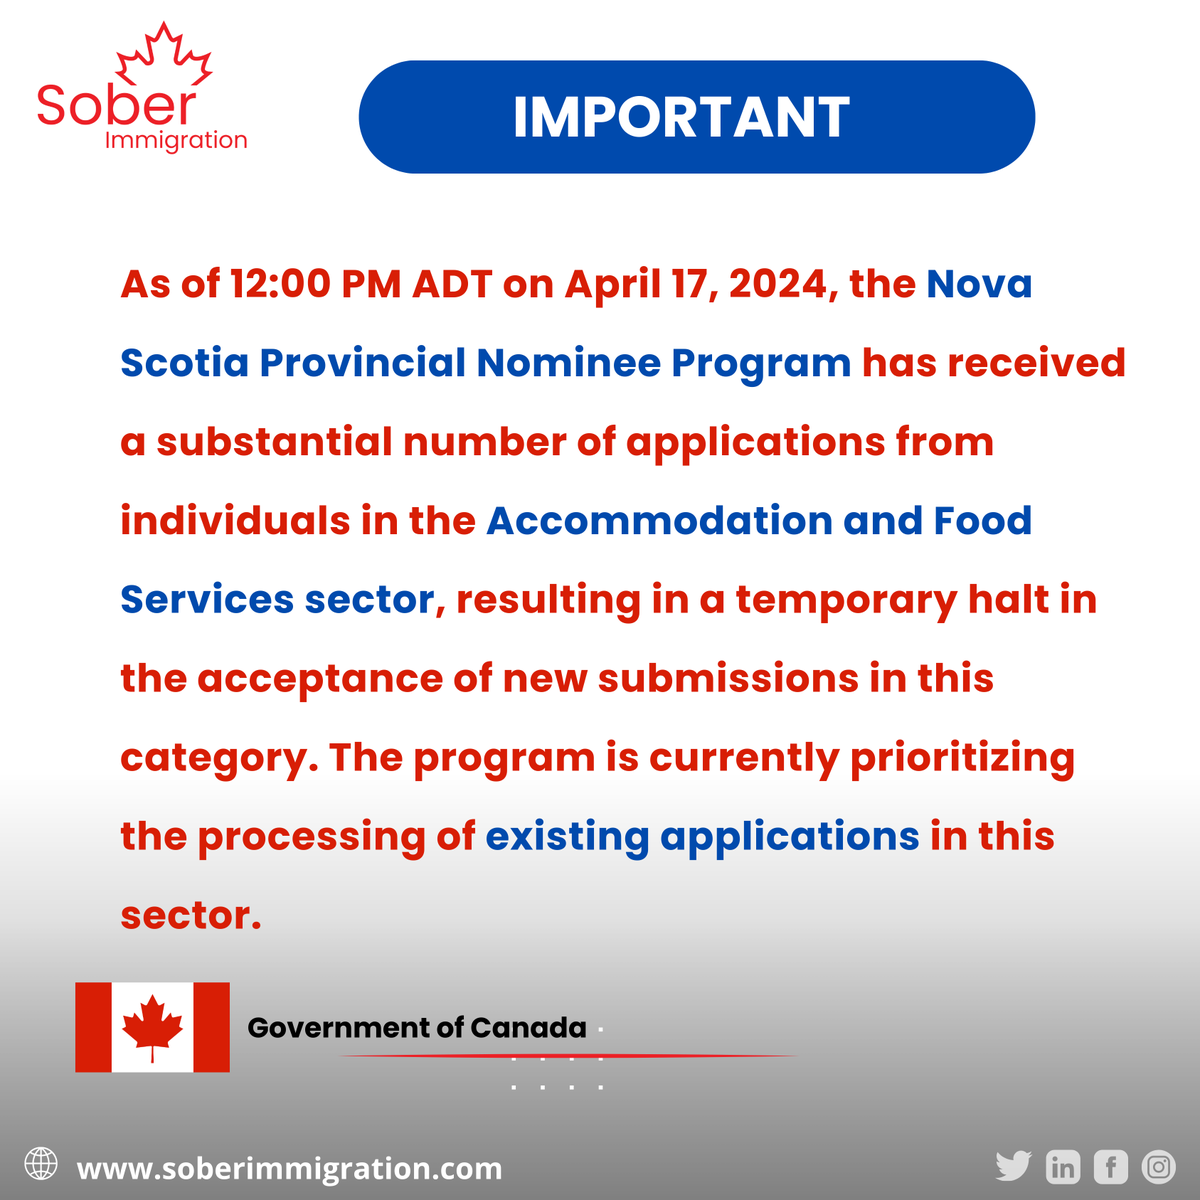 'Stay Informed: Navigating Immigration in Canada 📰 #ImmigrationCanada #VisaUpdates #PRProcess #LegalPathways #CanadianImmigration #StayUpdated #PolicyChanges #Residency #WorkPermit #StudyAbroad #PermanentResidency #Citizenship #ExpressEntry #PNP #FamilyImmigration